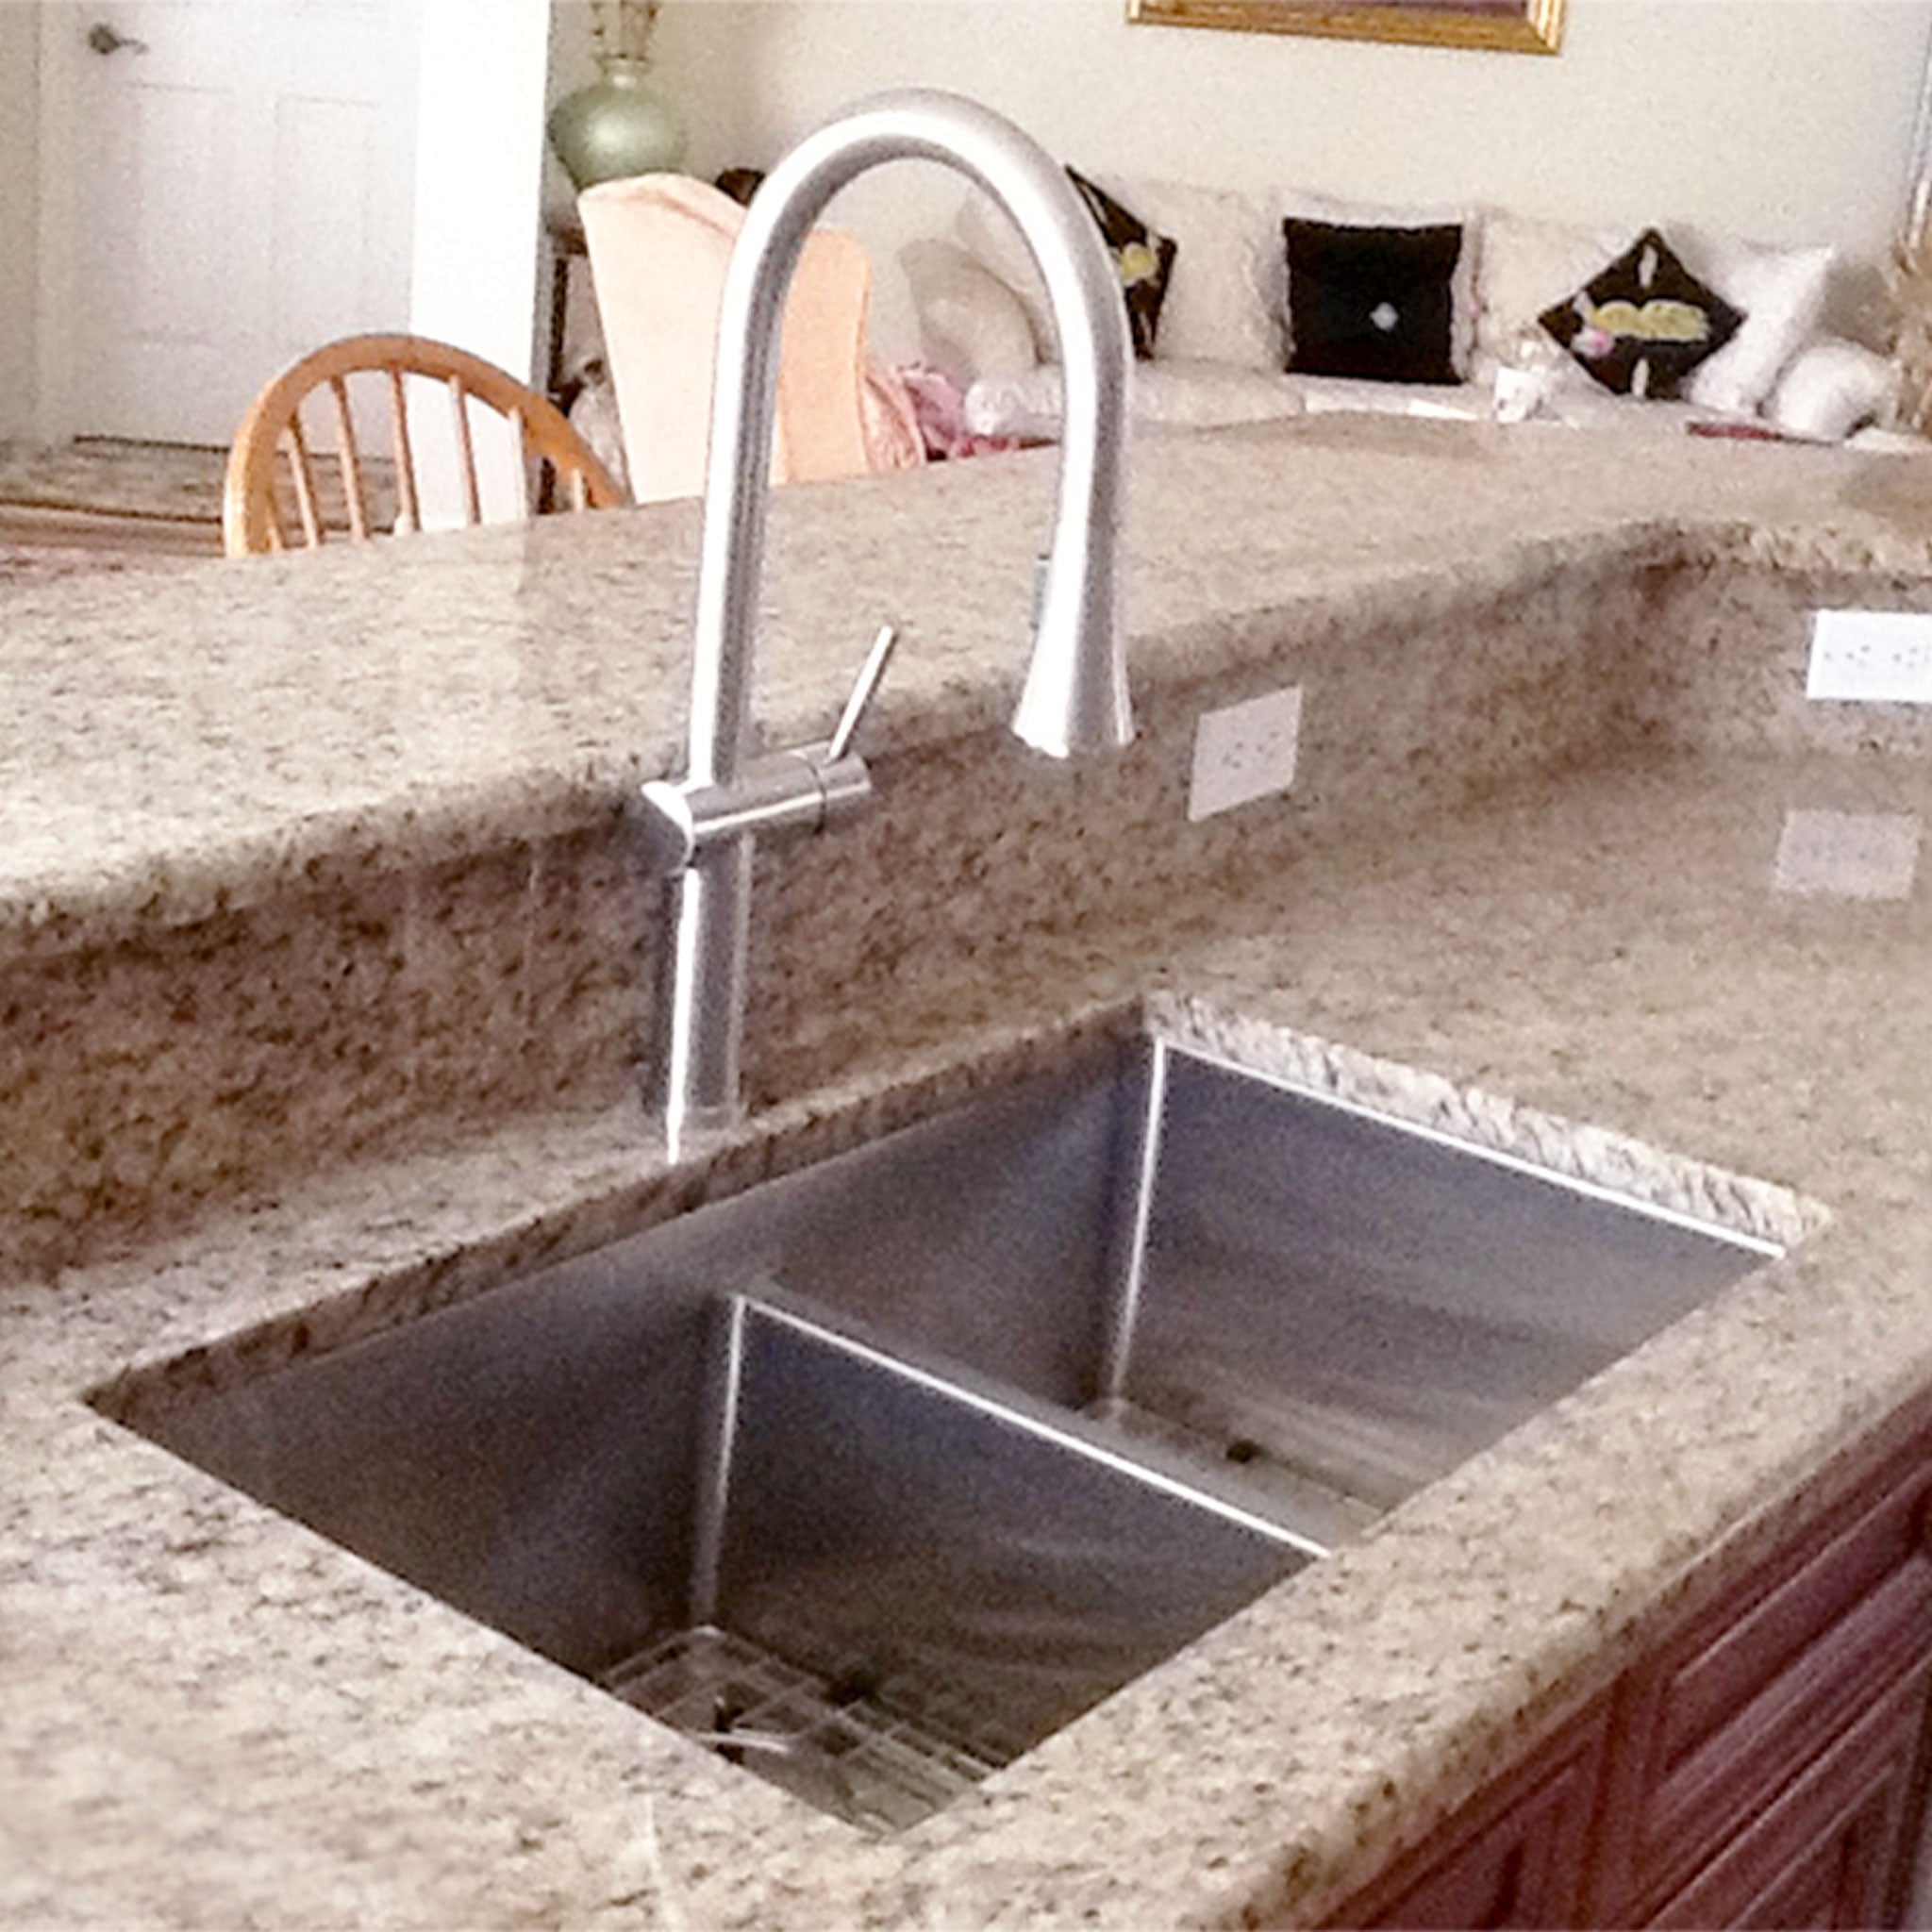 Photo submission from a client of a double-basin stainless steel classic kitchen sink with a low divide.